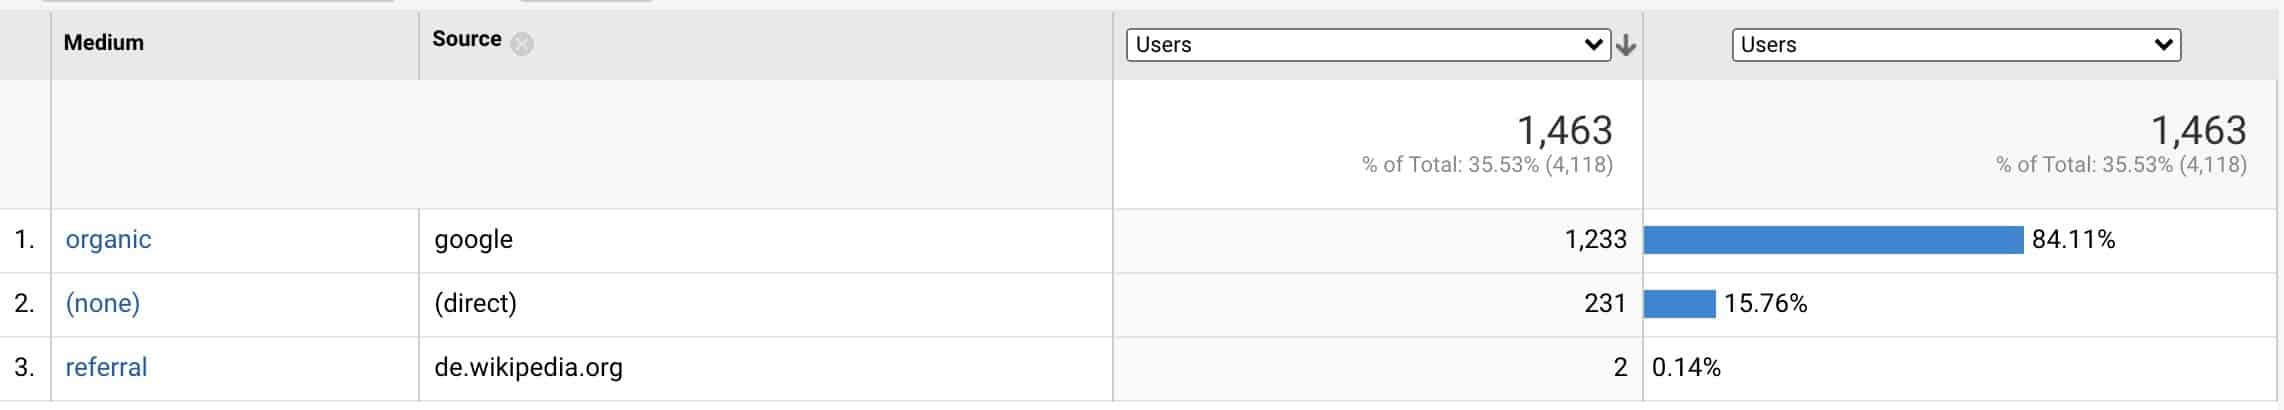 What is Not Considered A Default Medium In Google Analytics